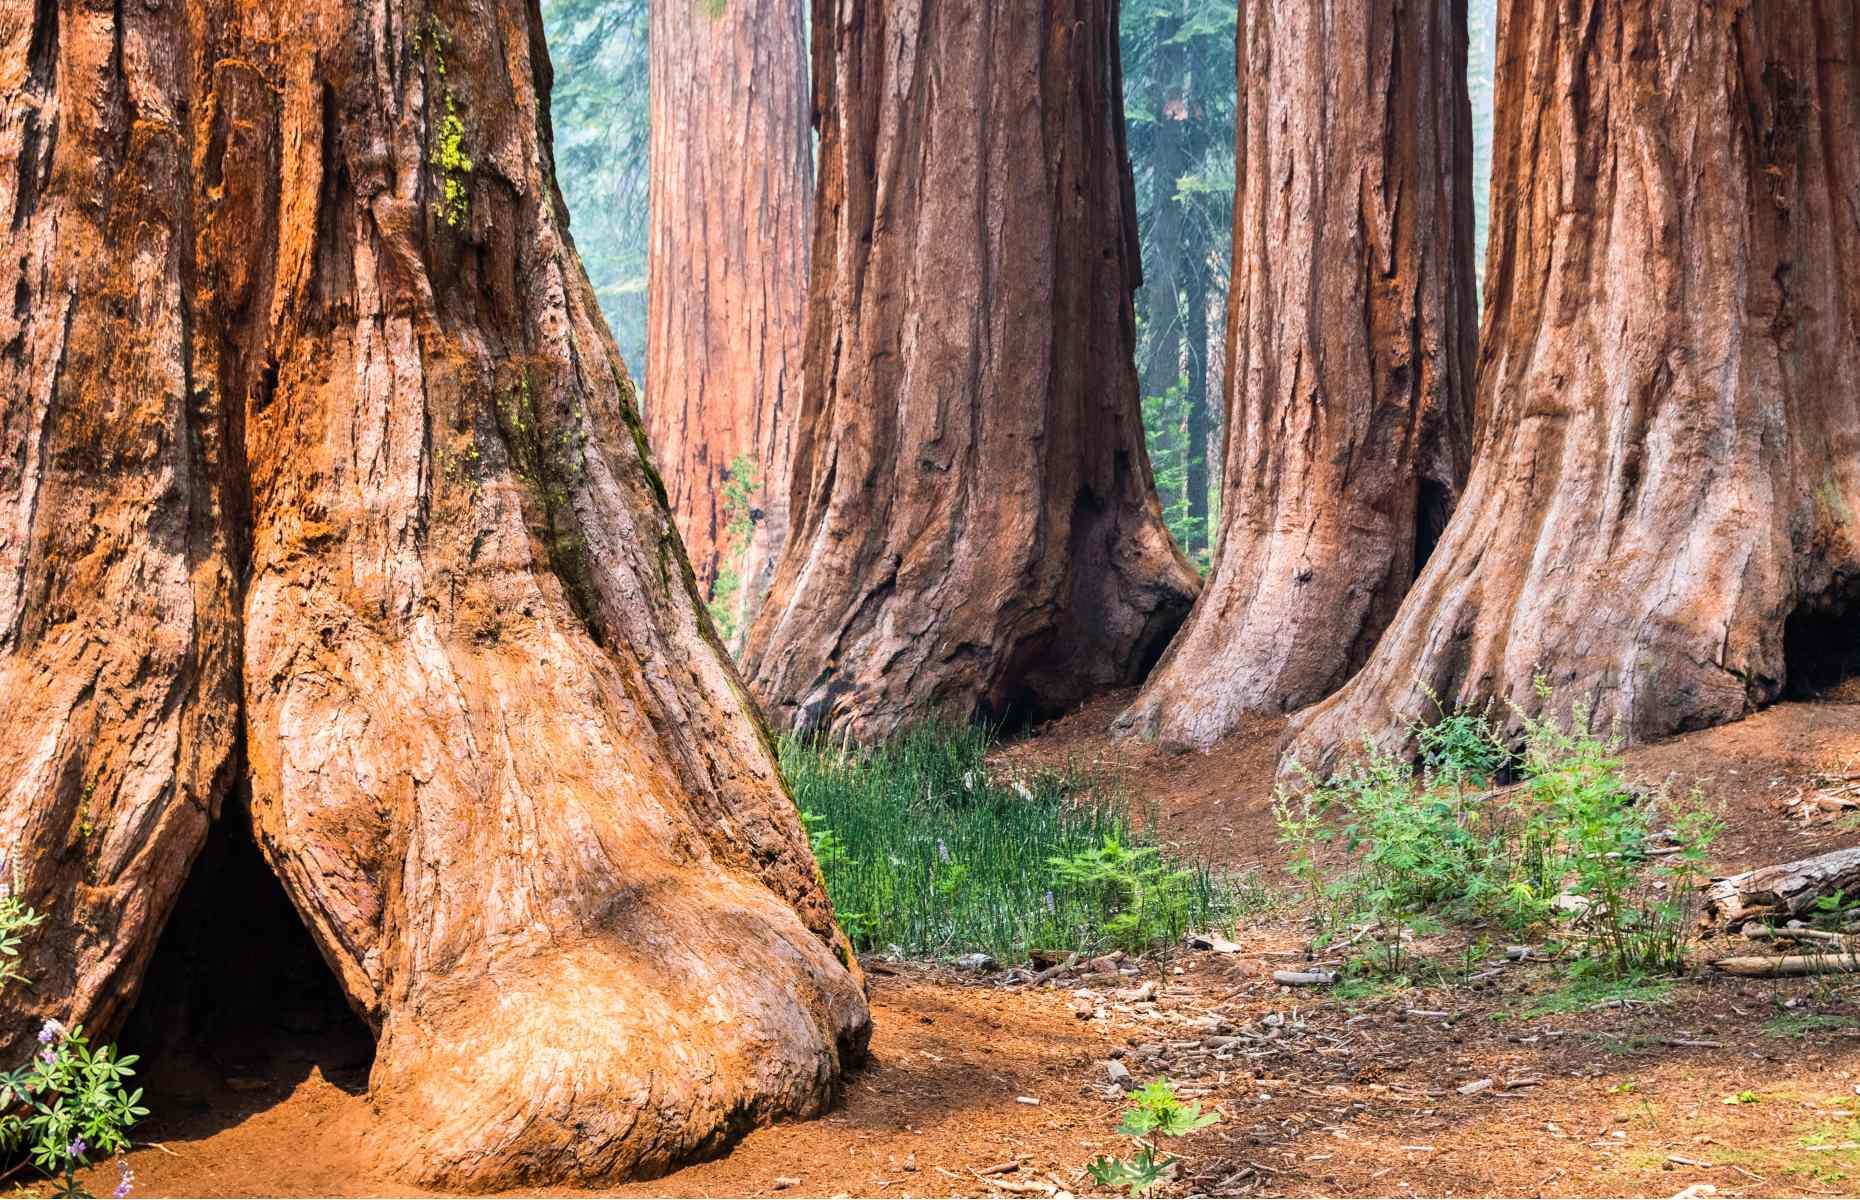 <p>In the years that followed, continued commercial exploitation as a result of mining, animal grazing and tourism gradually devastated the Yosemite Valley ecosystem. In 1864 a group of conservationists convinced President Abraham Lincoln to declare the valley, together with the Mariposa Grove of giant sequoias (pictured), a public trust of California. This was the first time in US history that the government acted to protect land for public enjoyment – meaning that Yosemite paved the way for the national park movement.</p>